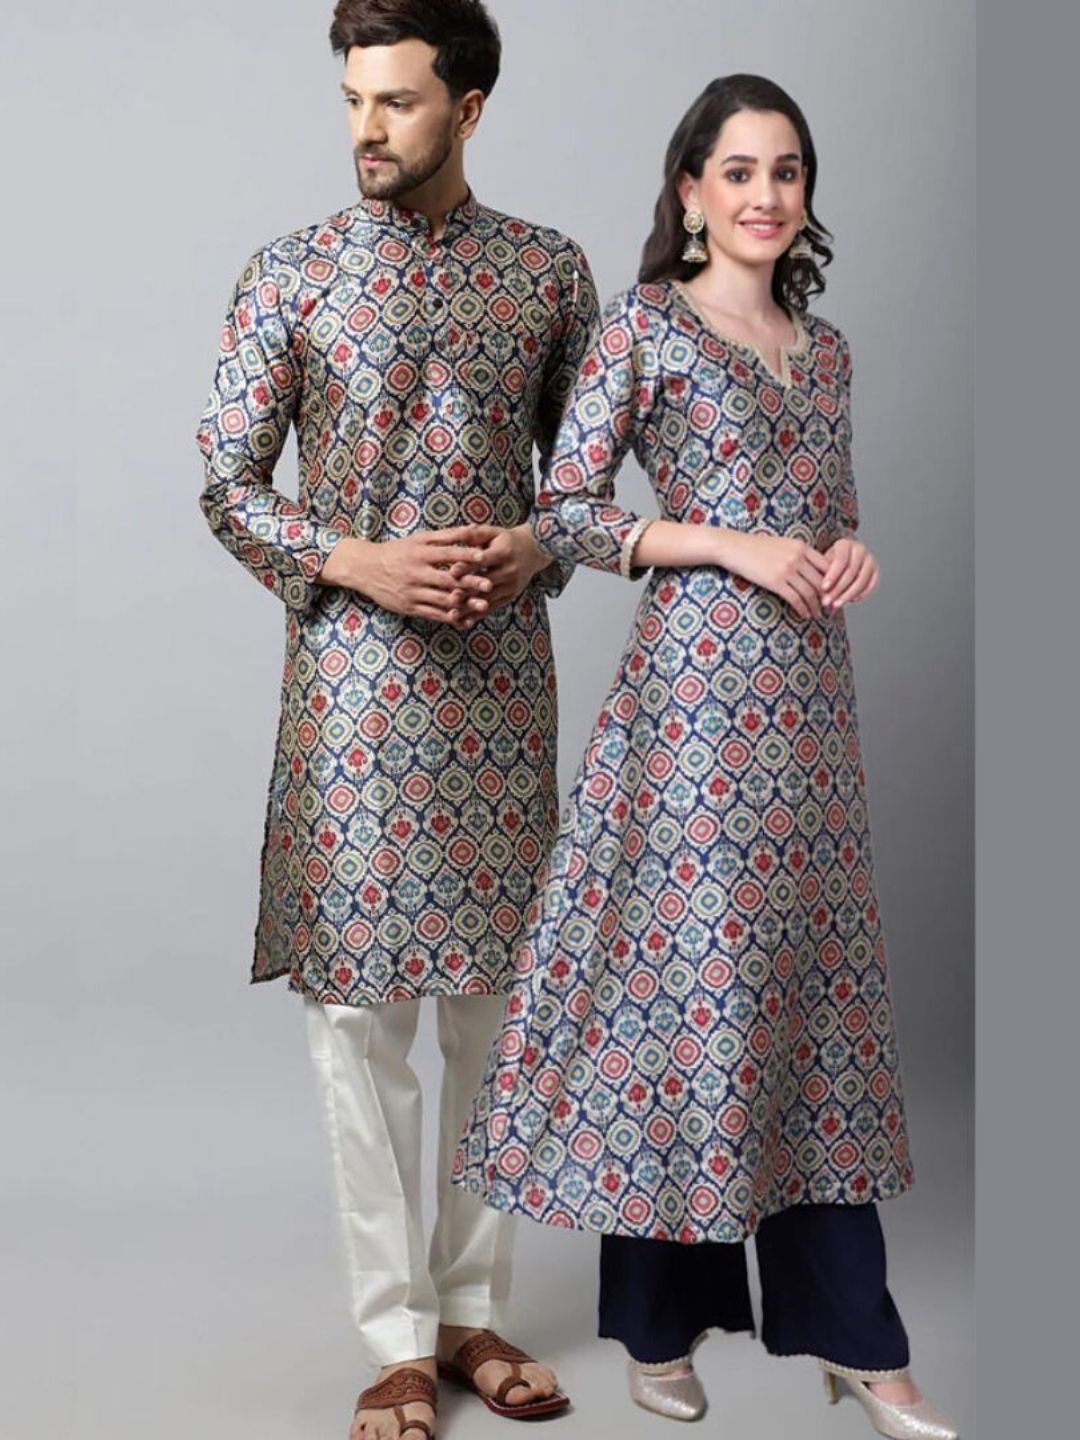 Matching outfits for couples💗 | Wedding matching outfits, Couple dress,  Indian wedding outfits